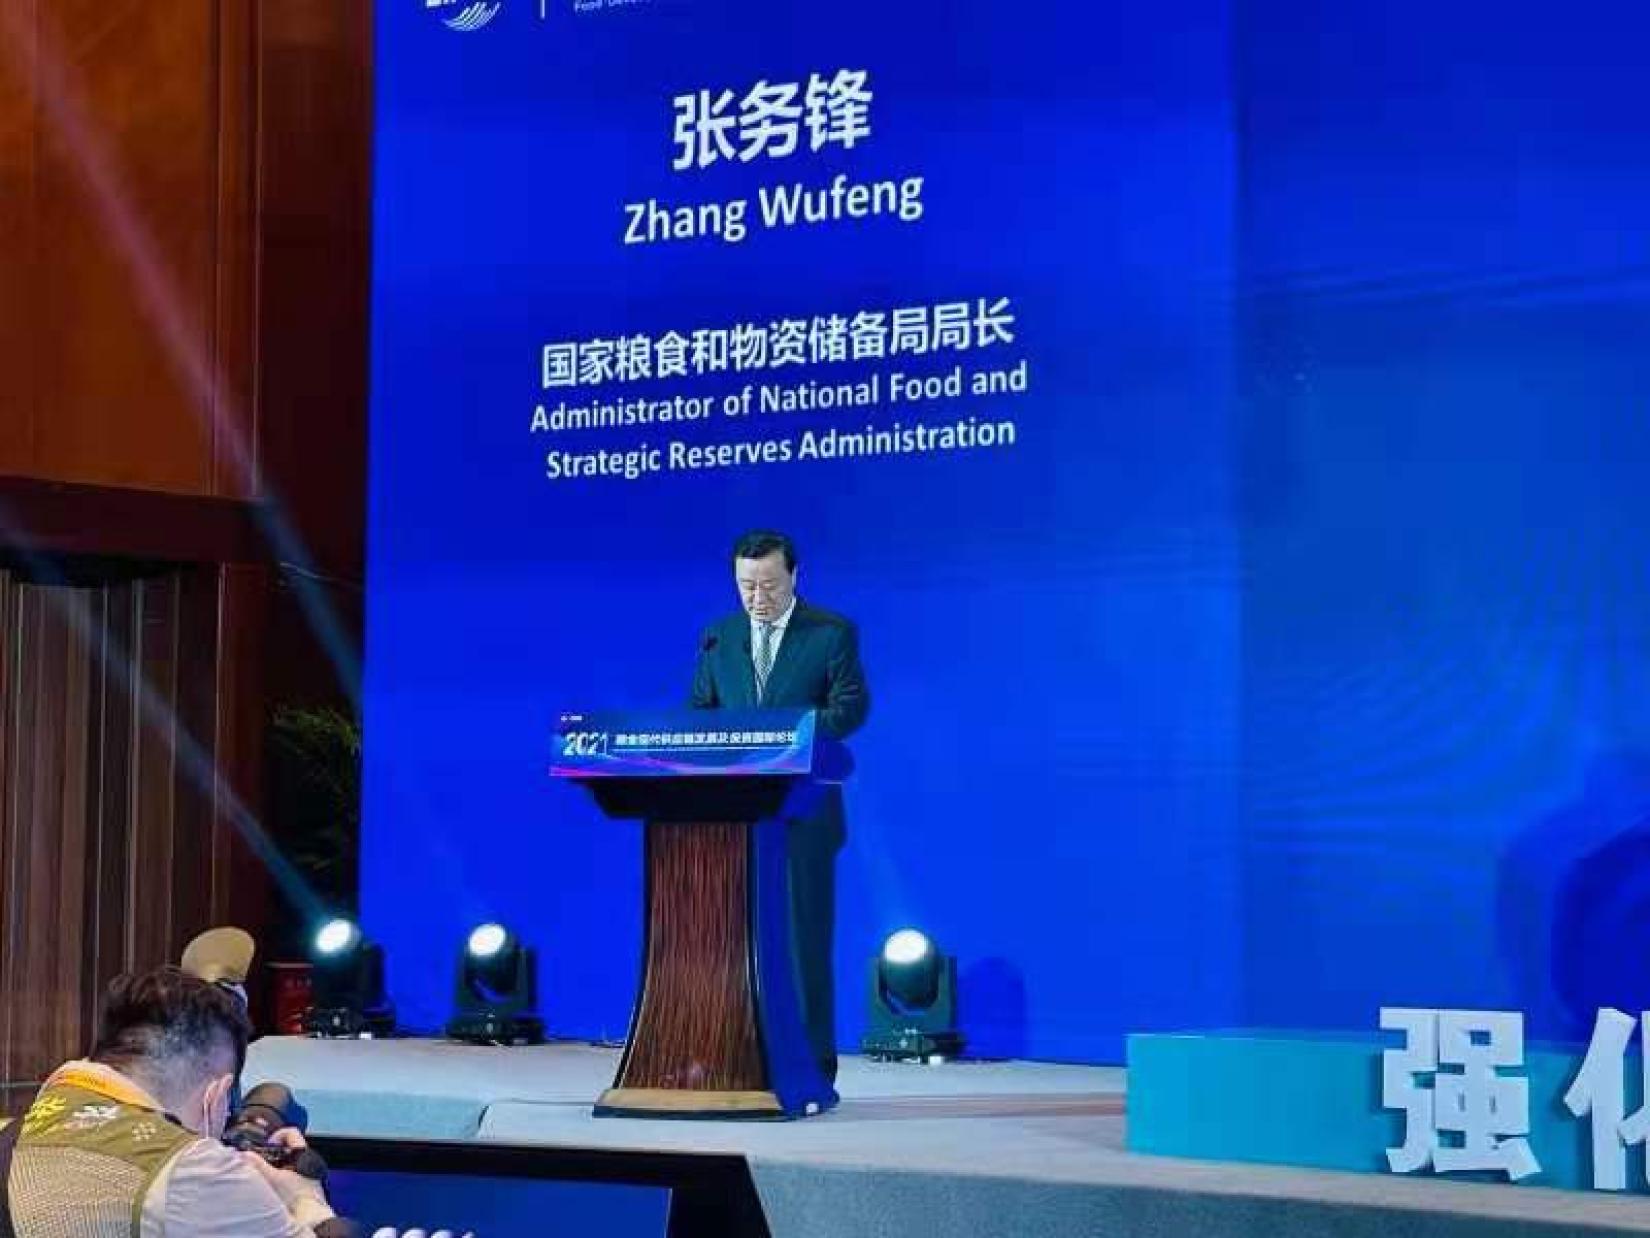 Mr. Zhang Wufeng, Administrator, National Food and Strategic Reserves Administration delivers remarks at the Forum